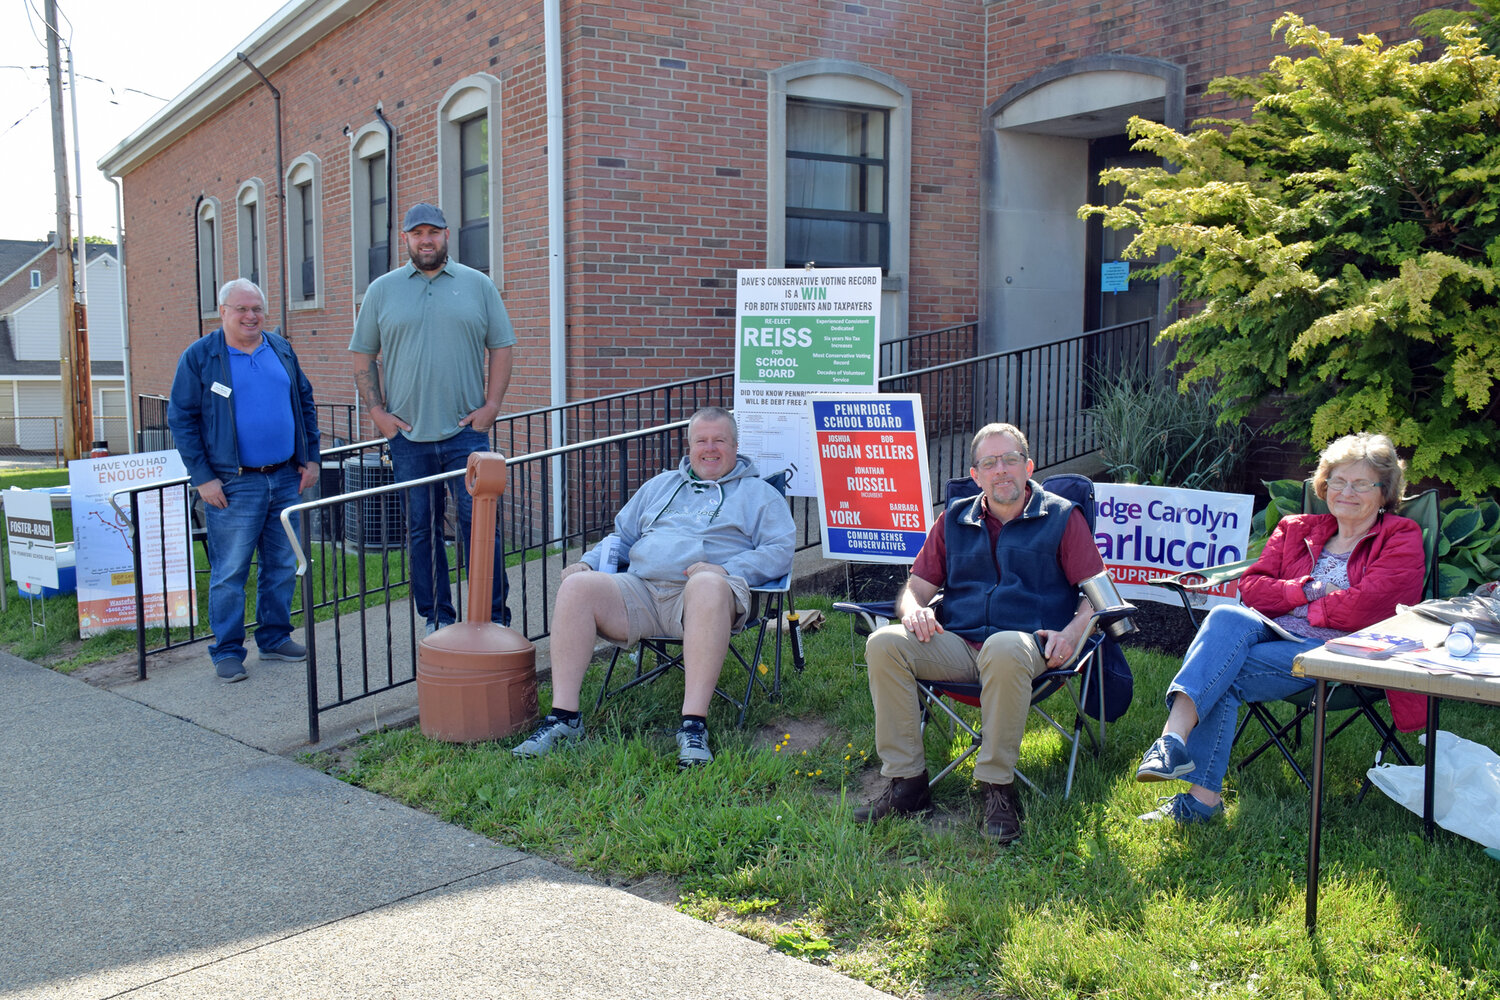 Both party poll representatives outside the Perkasie firehouse.